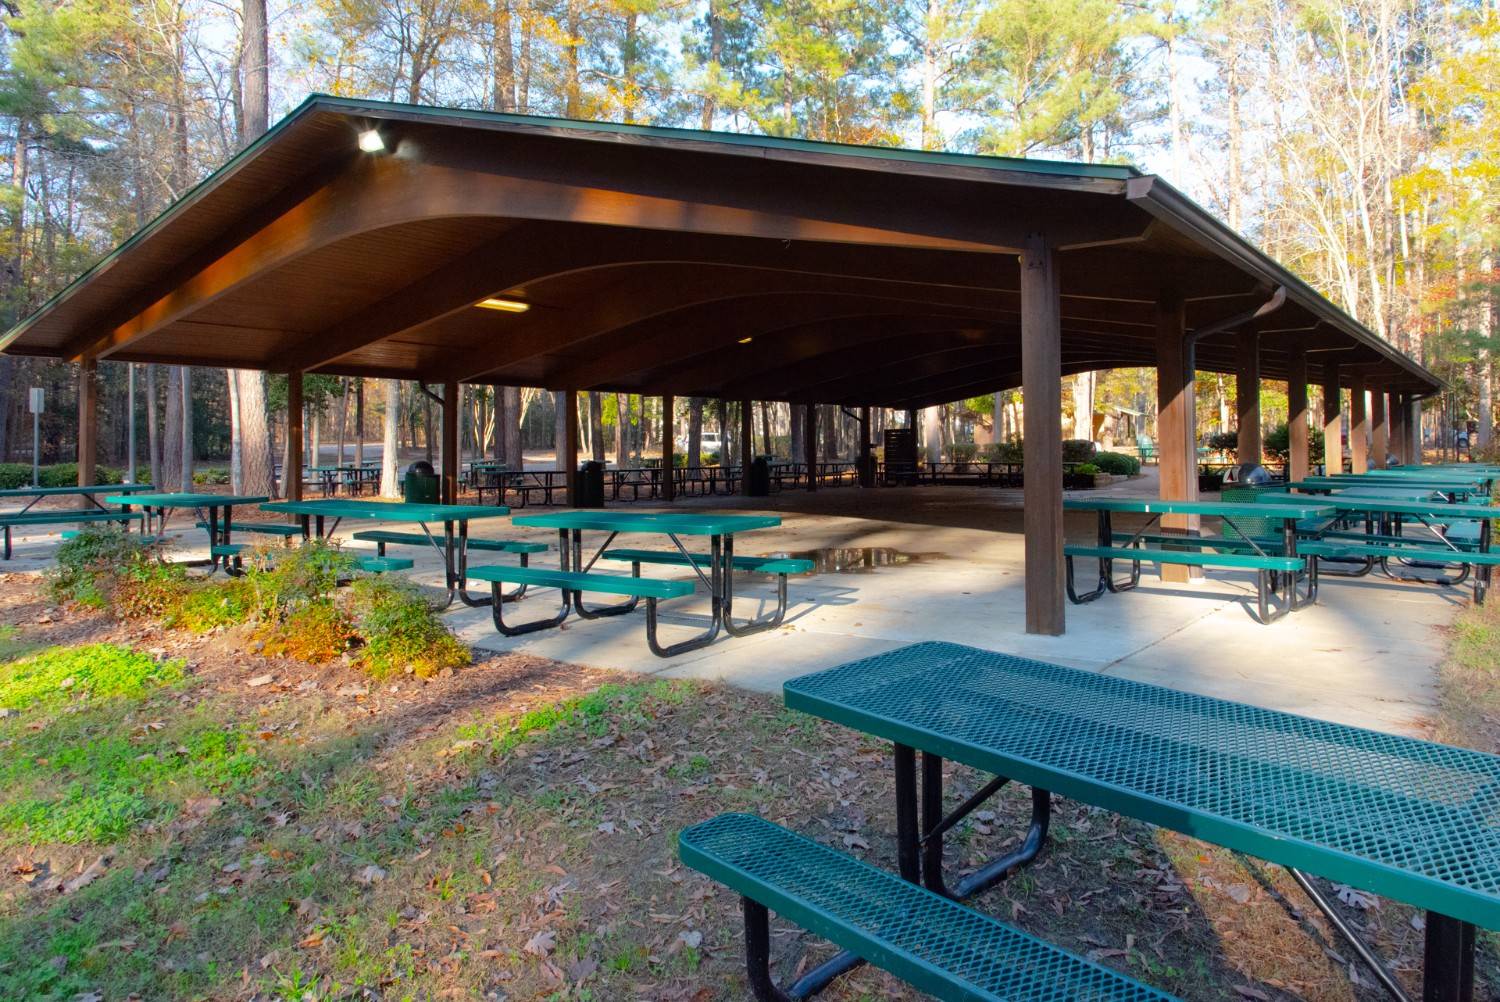 Rotary Shelter at Ritter Park